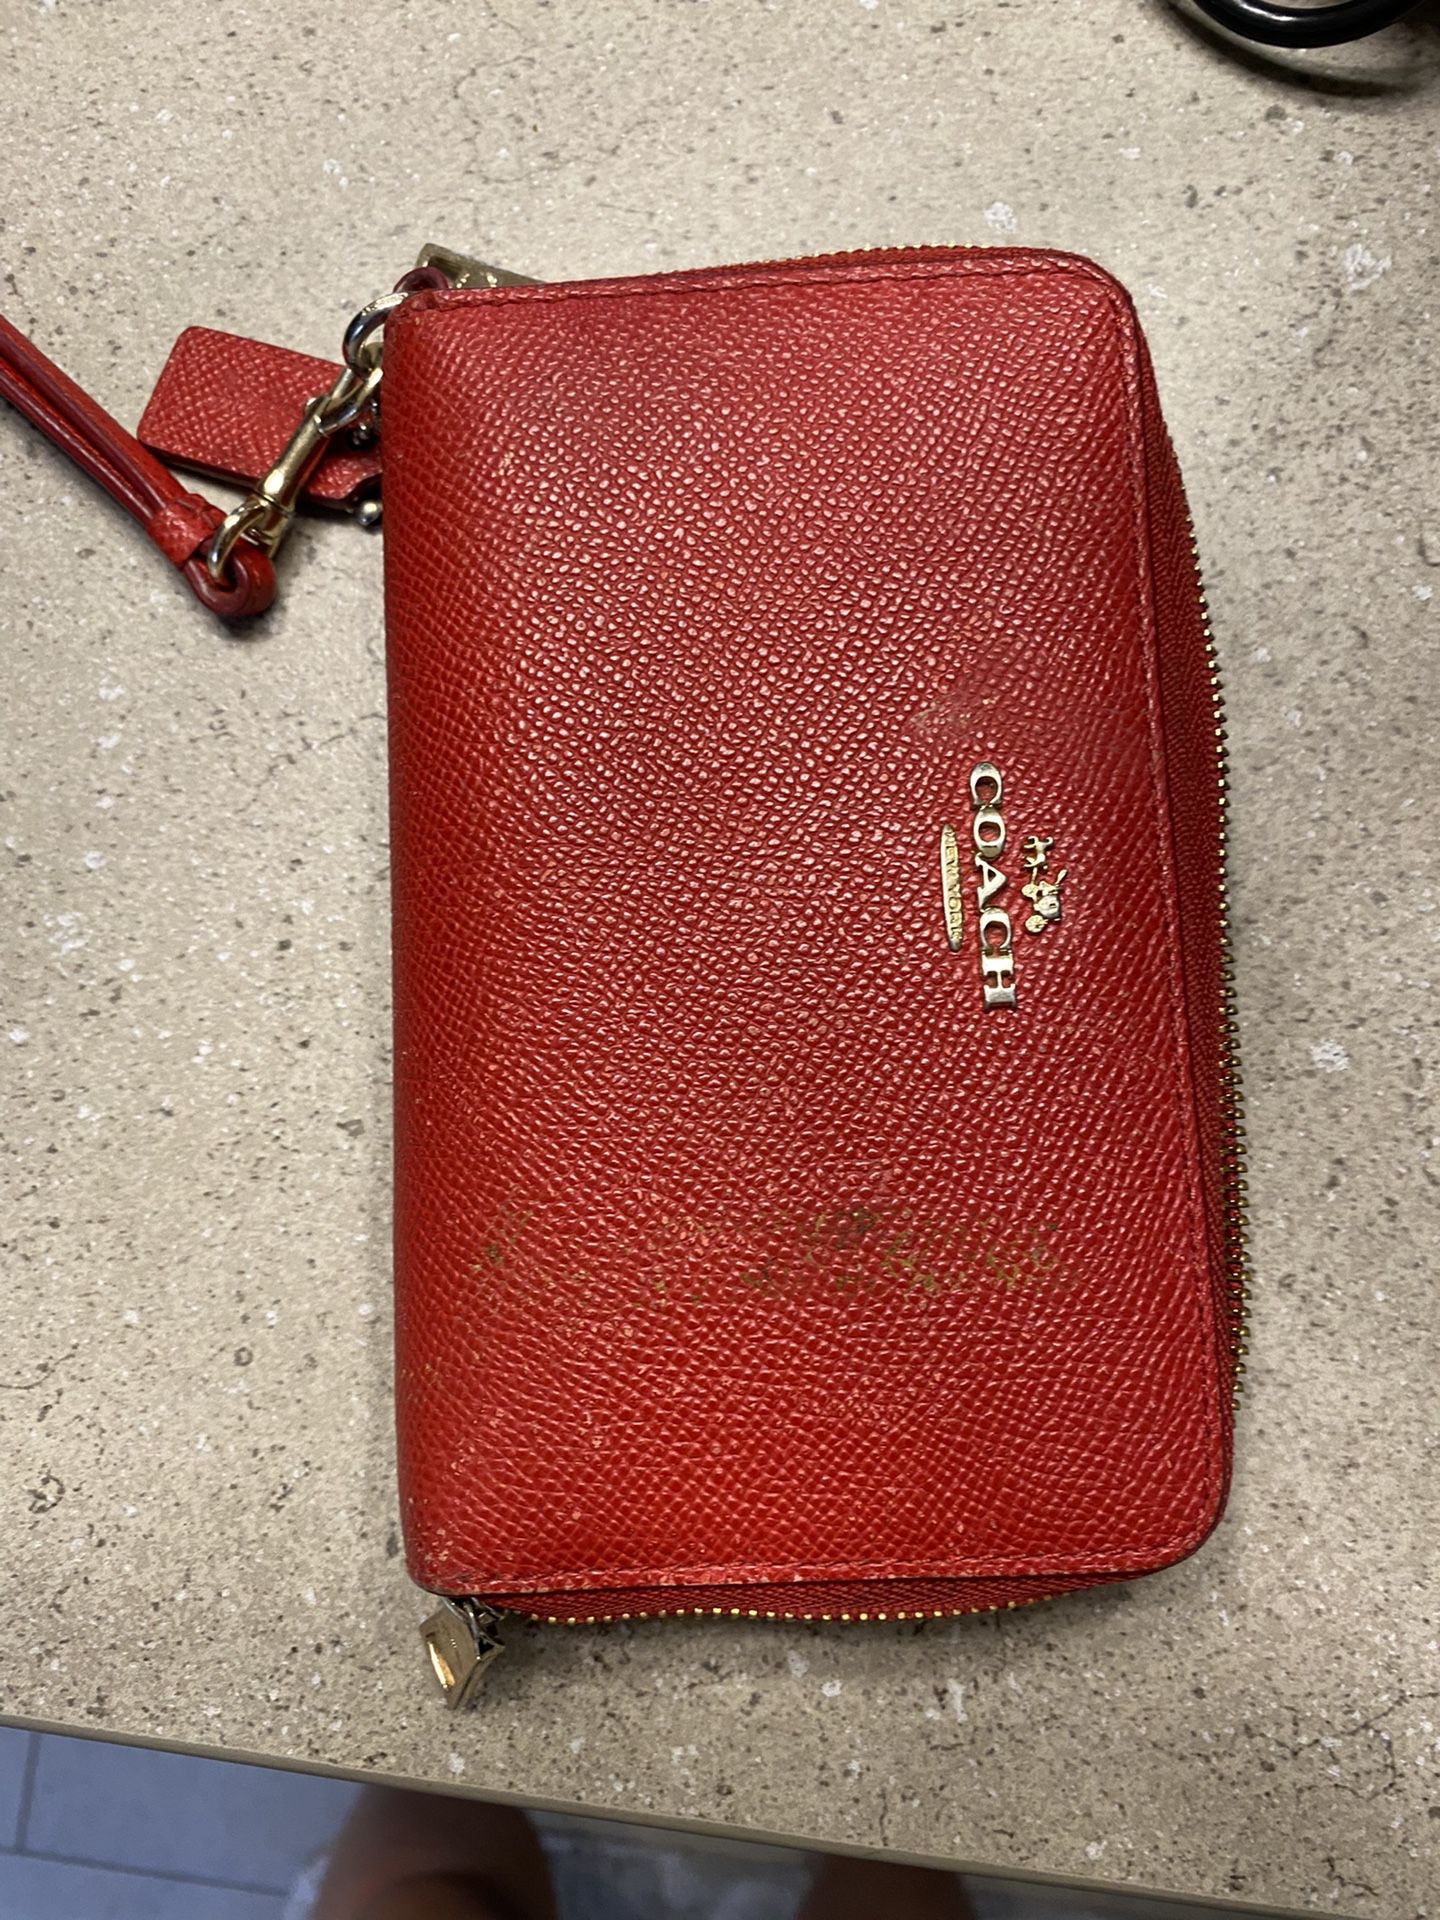 Red Coach Wallet